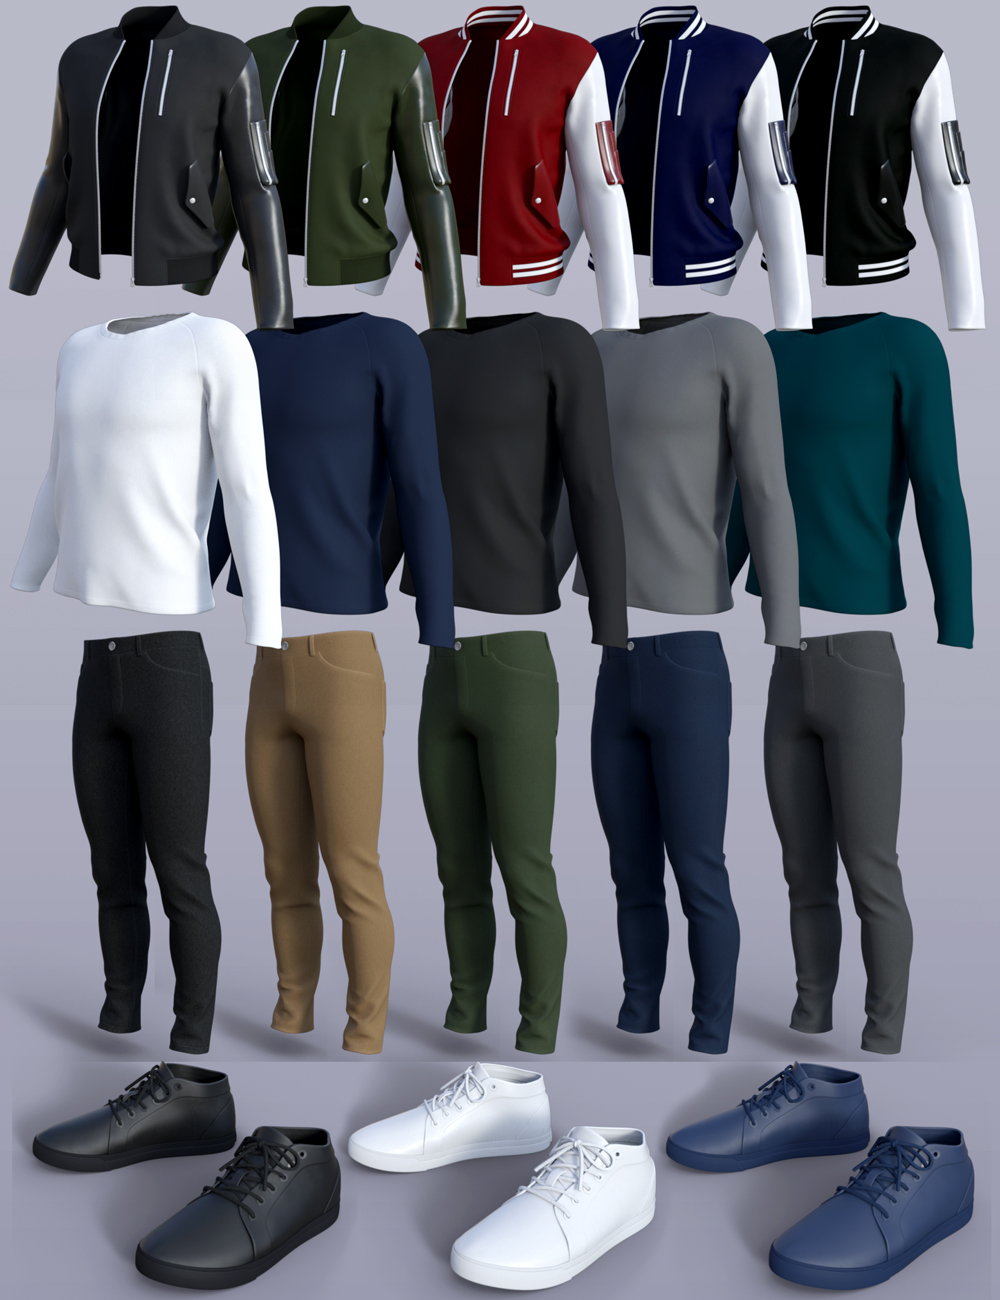 H&C Casual B for Genesis 3 Male(s) by: IH Kang, 3D Models by Daz 3D